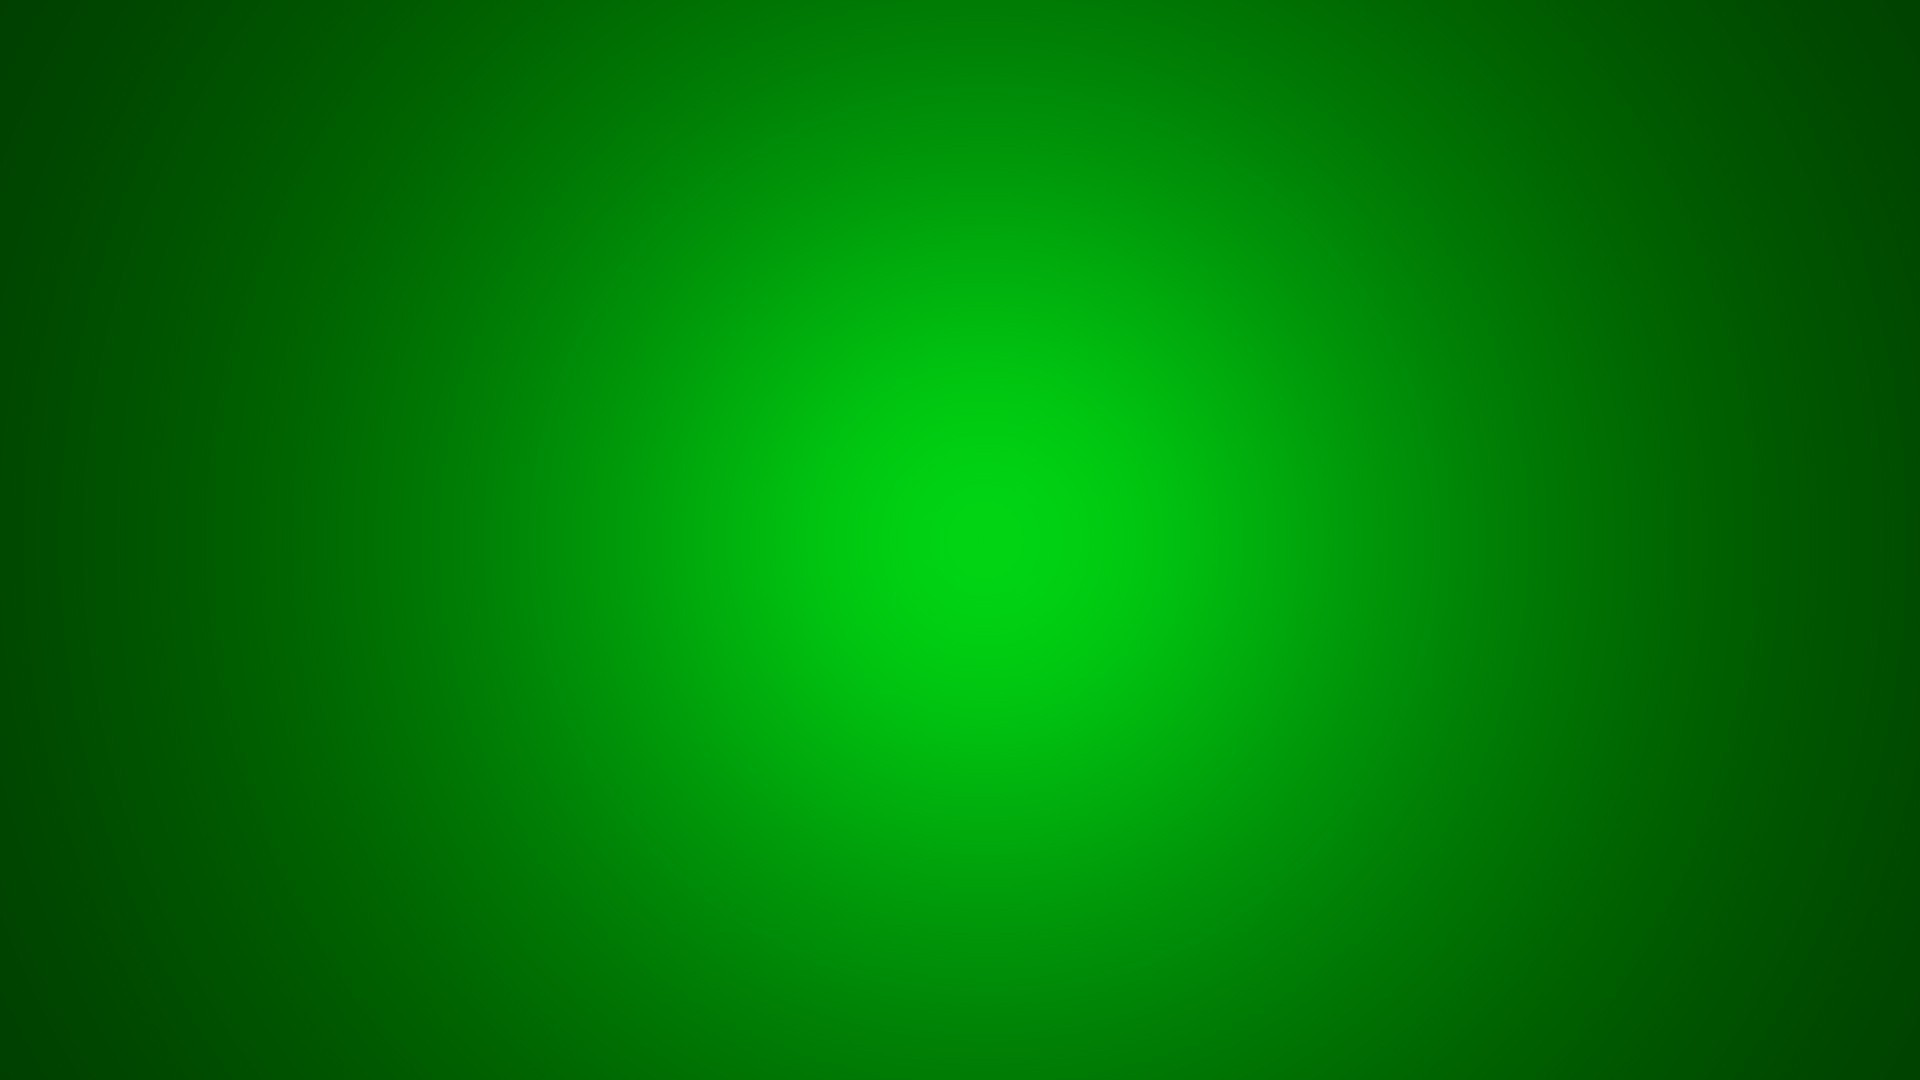 HD Wallpaper Neon Green with image resolution 1920x1080 pixel. You can make this wallpaper for your Desktop Computer Backgrounds, Mac Wallpapers, Android Lock screen or iPhone Screensavers